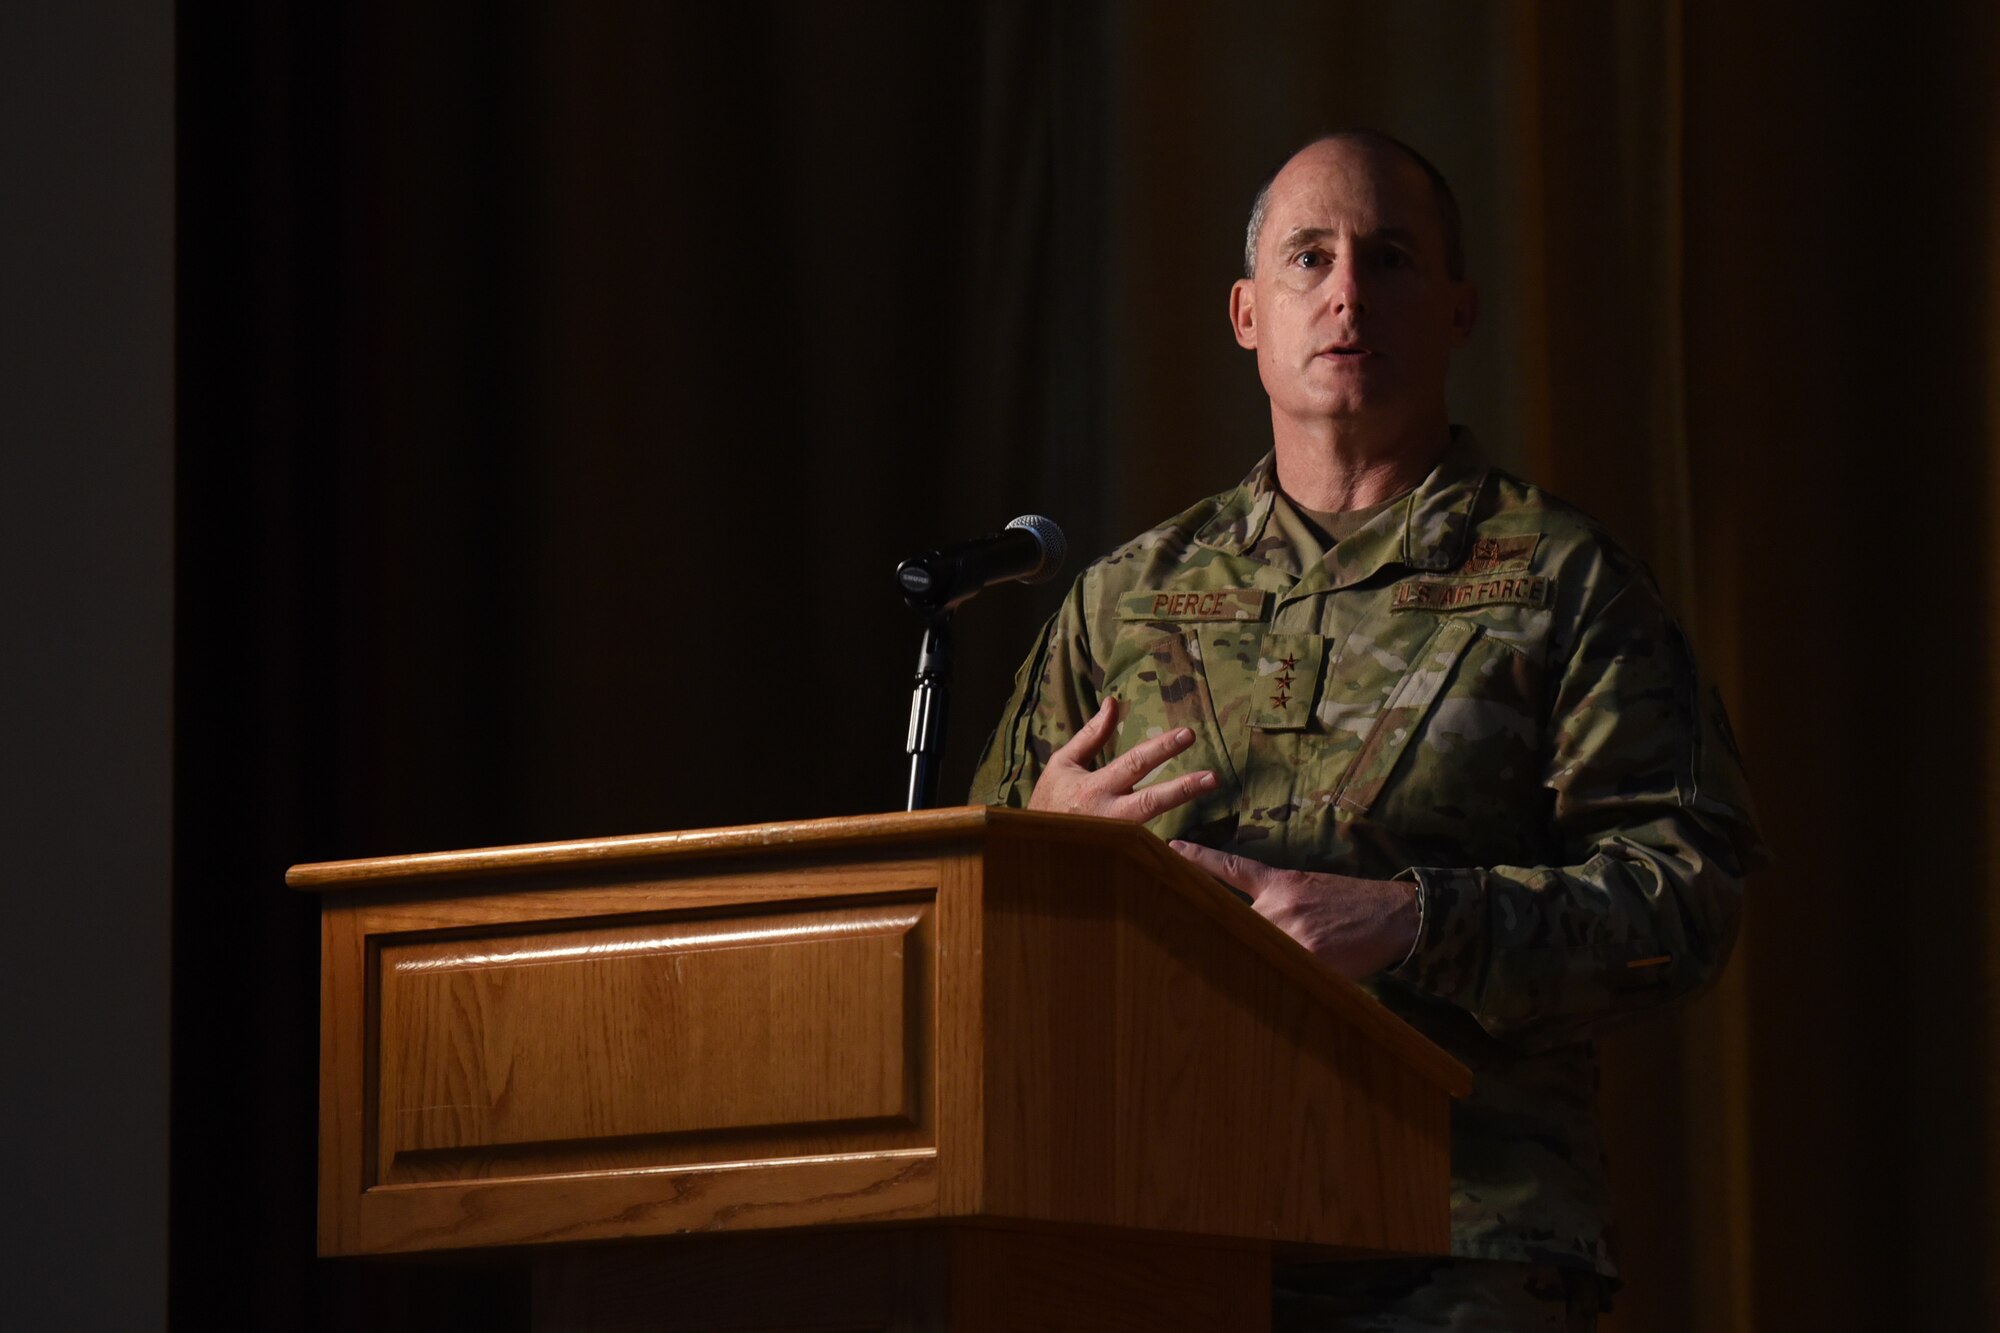 U.S. Air Force Lt. Gen. Kirk S. Pierce, commander of Continental U.S. North American Aerospace Defense Command Region and 1st Air Force (Air Forces Northern and Air Forces Space), speaks during the intelligence, surveillance, and reconnaissance professionals’ graduation ceremony, at Goodfellow Air Force Base, Texas, May 24, 2022. Pierce spoke to the graduates and empowered them to perform intelligence functions and activities to support the United States and allied forces. (U.S. Air Force photo by Senior Airman Abbey Rieves)